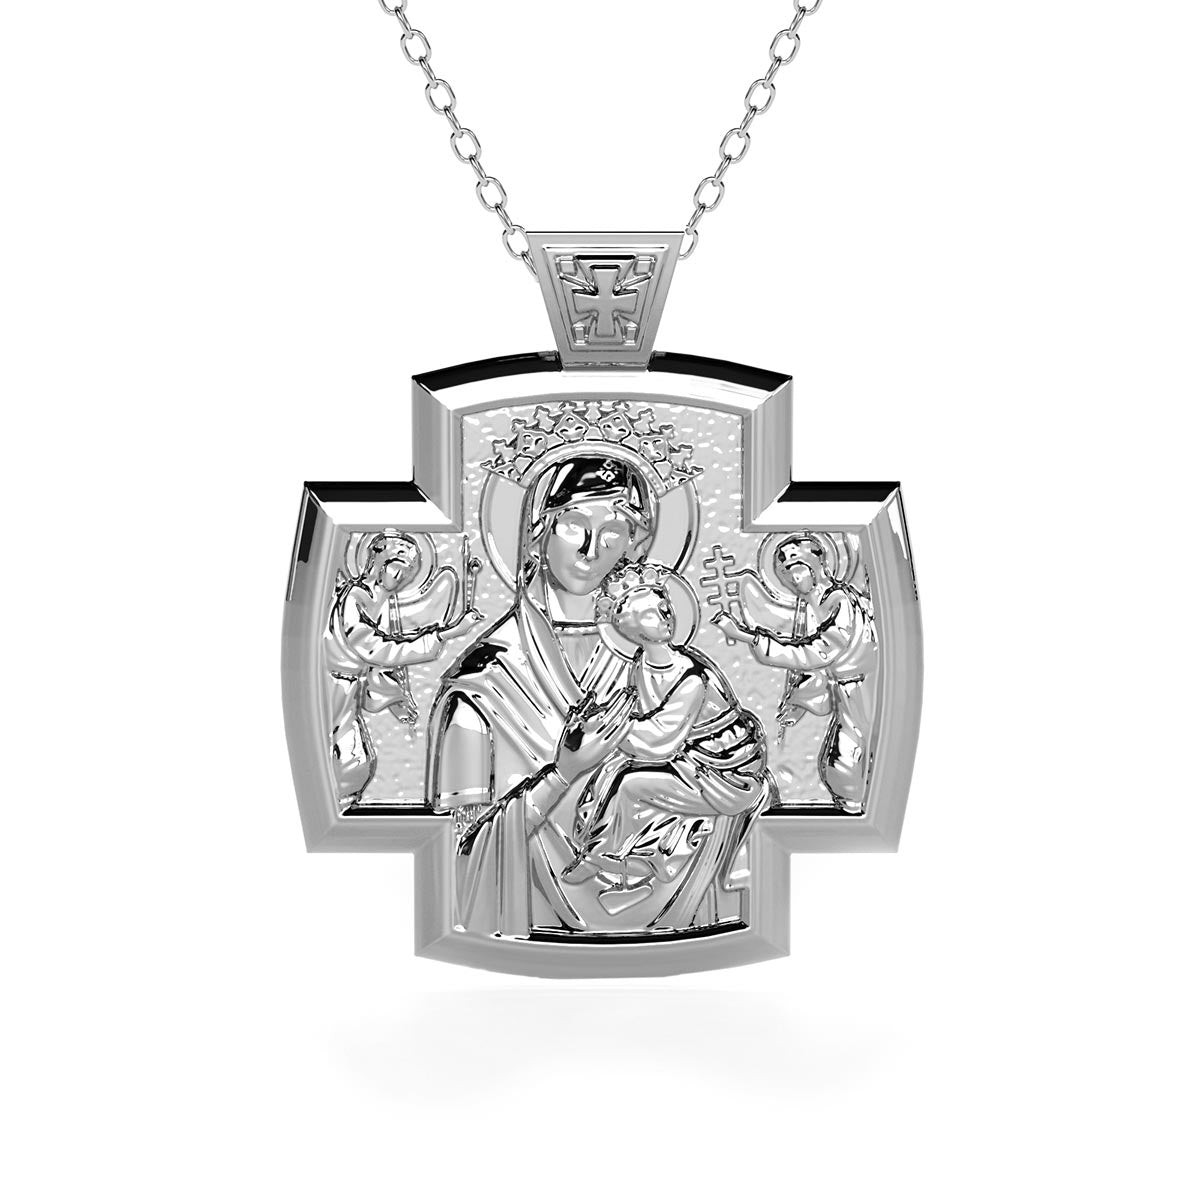 Virgin Mary & Jesus Two-Sided Cross Necklace